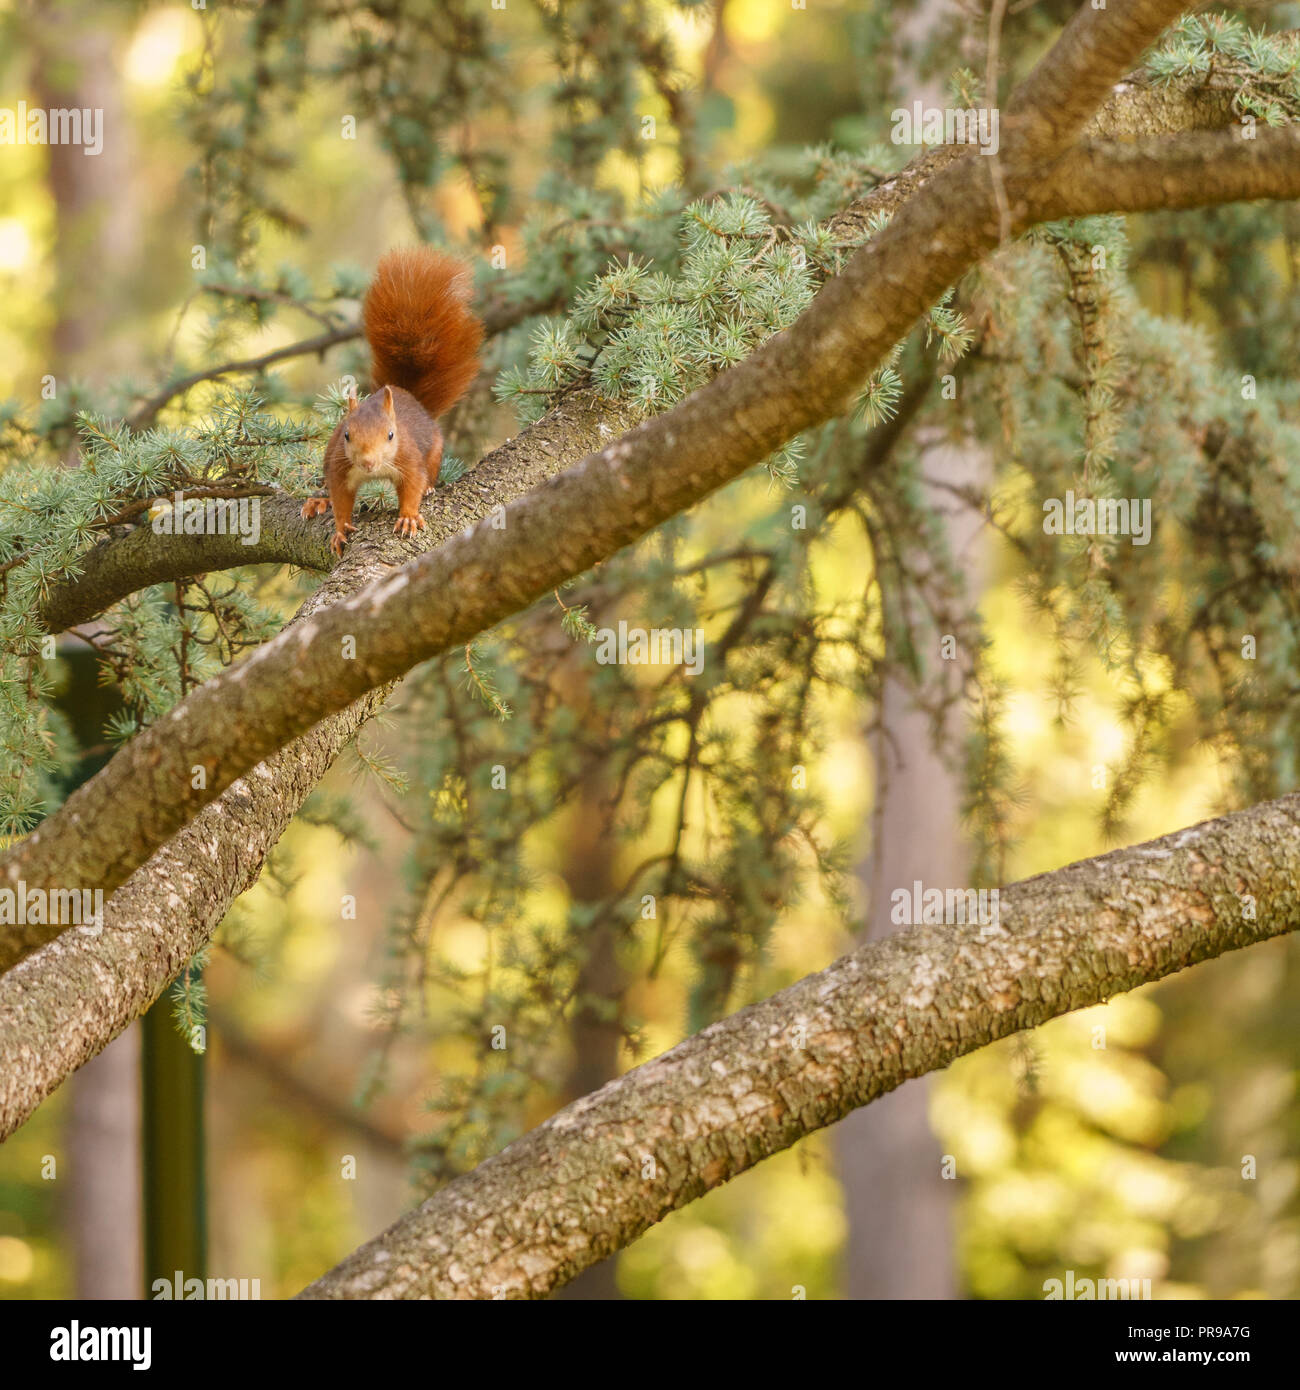 Wild brown squirrel from Spain. Stock Photo